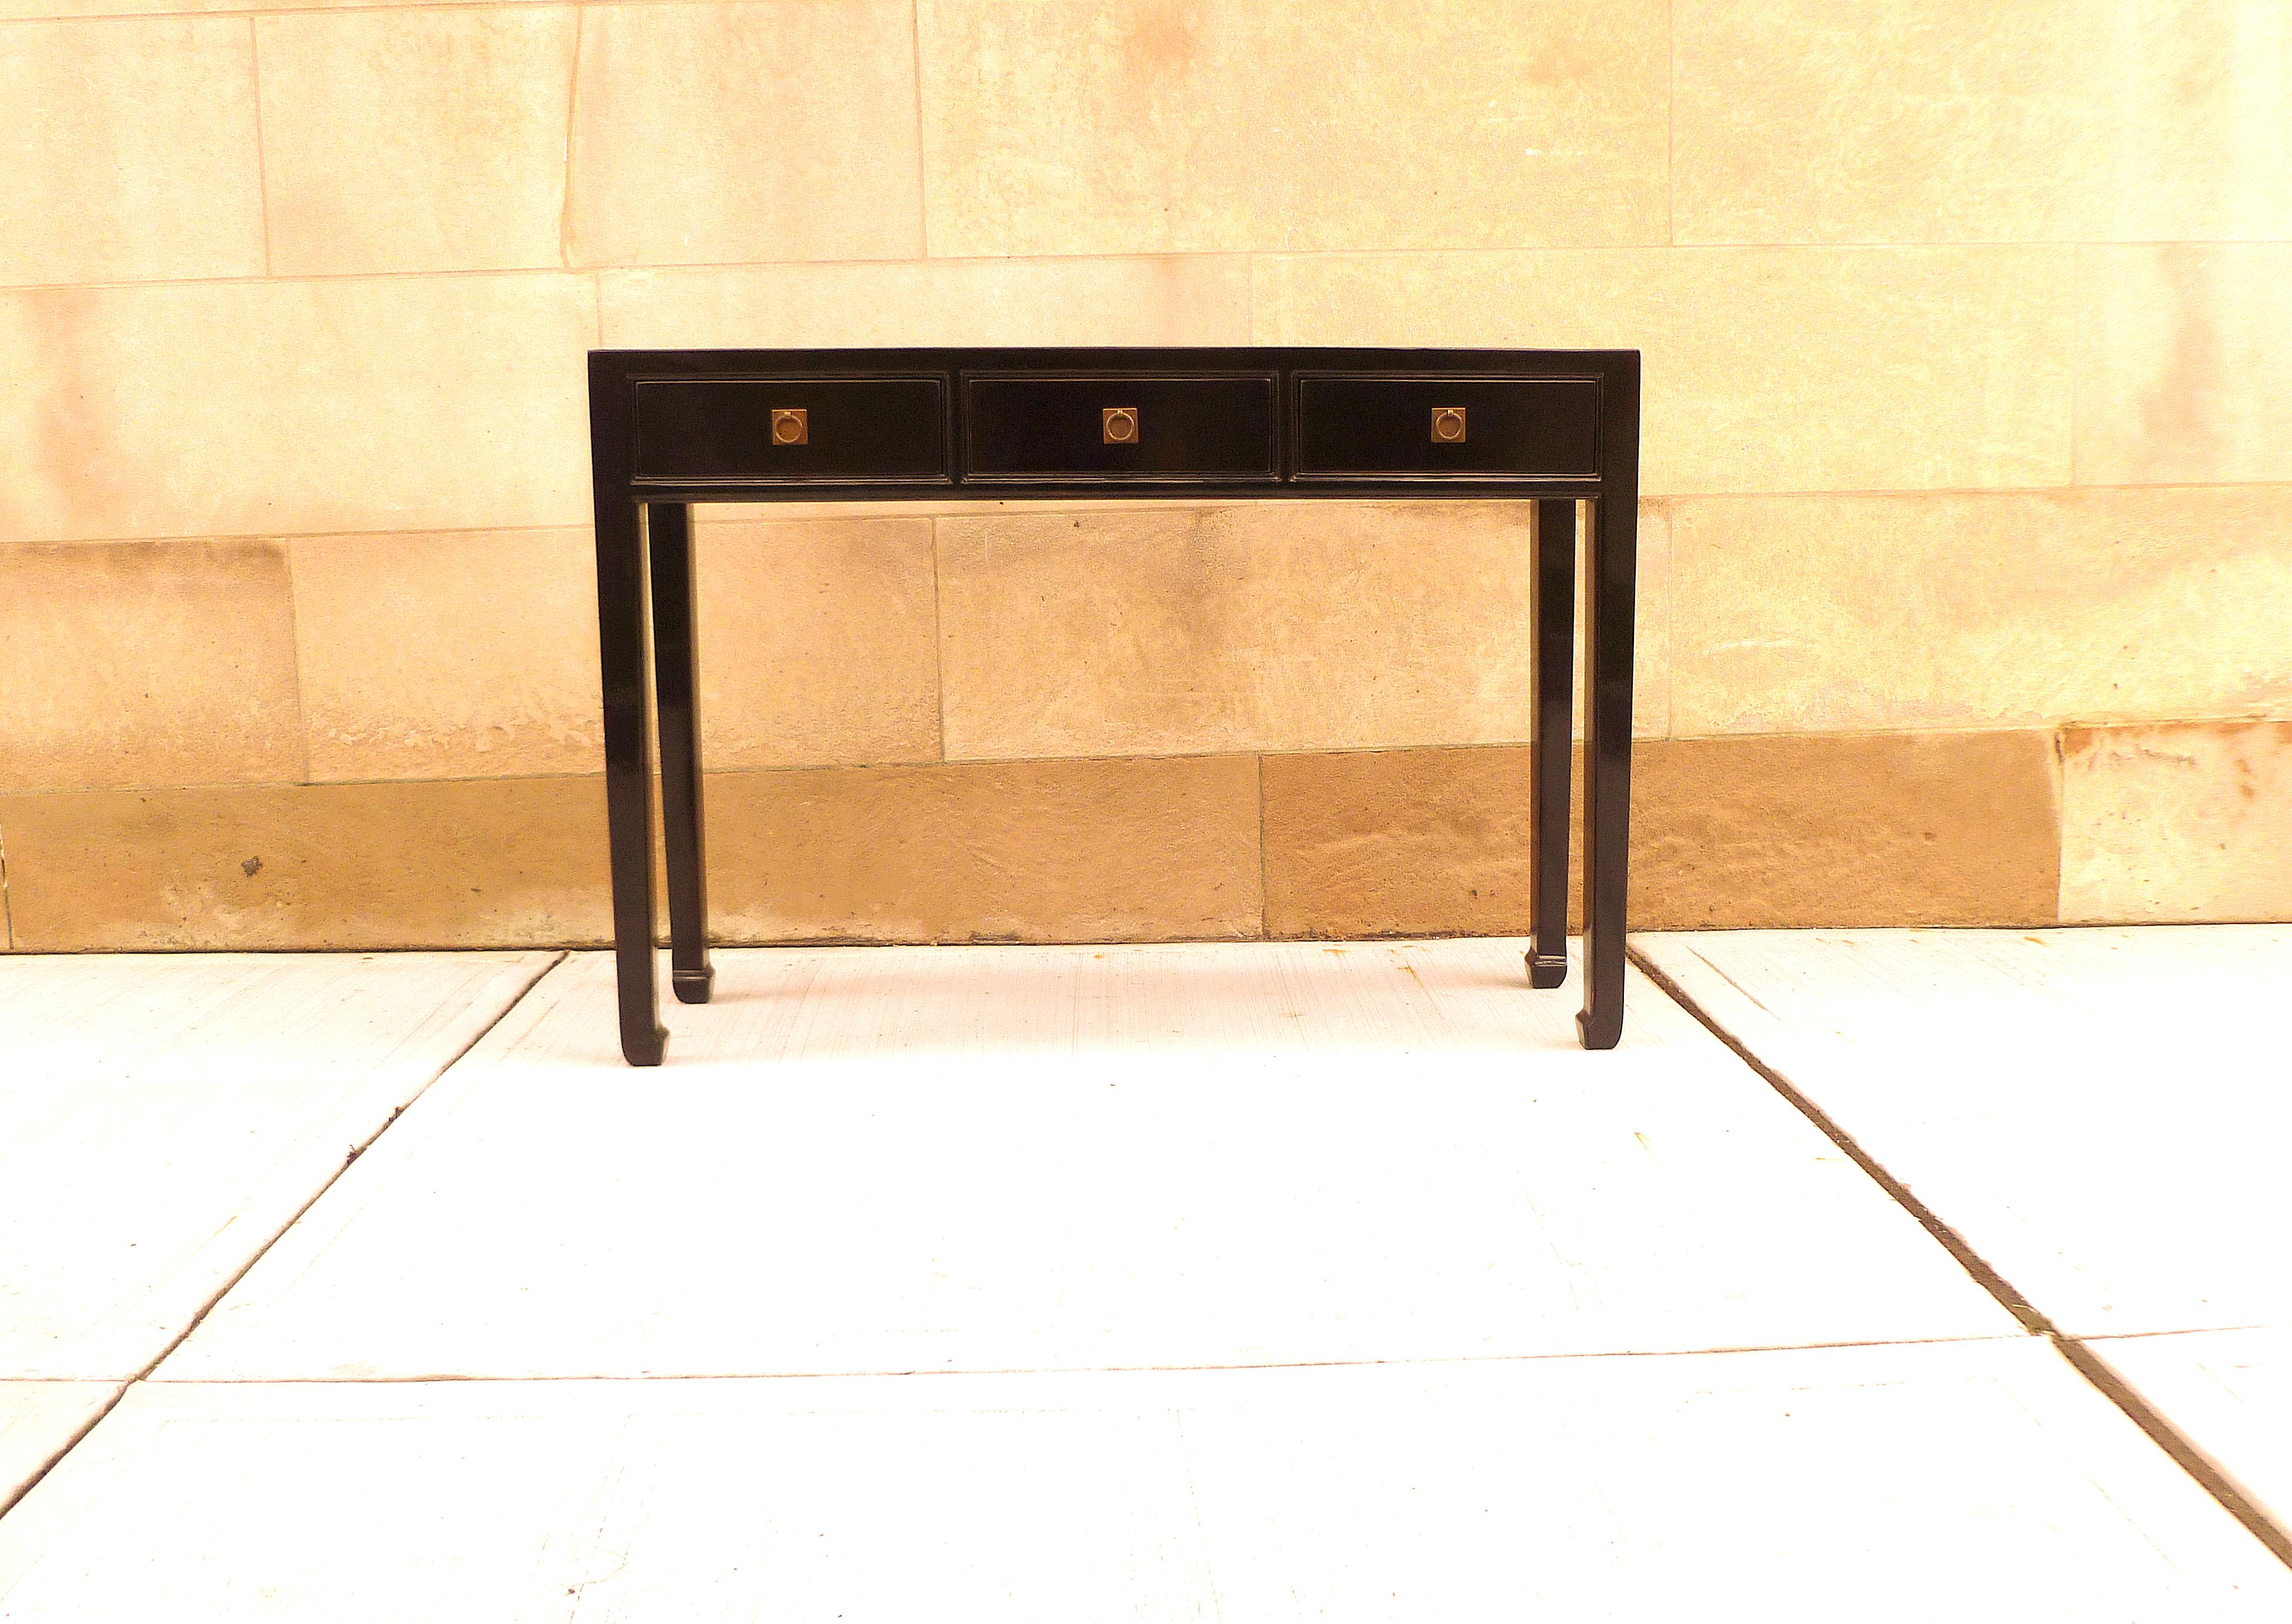 Fine black lacquer console table with drawers, very elegant, simple and beautiful color. We carry fine quality furniture with elegant finished and has been appeared many times in 